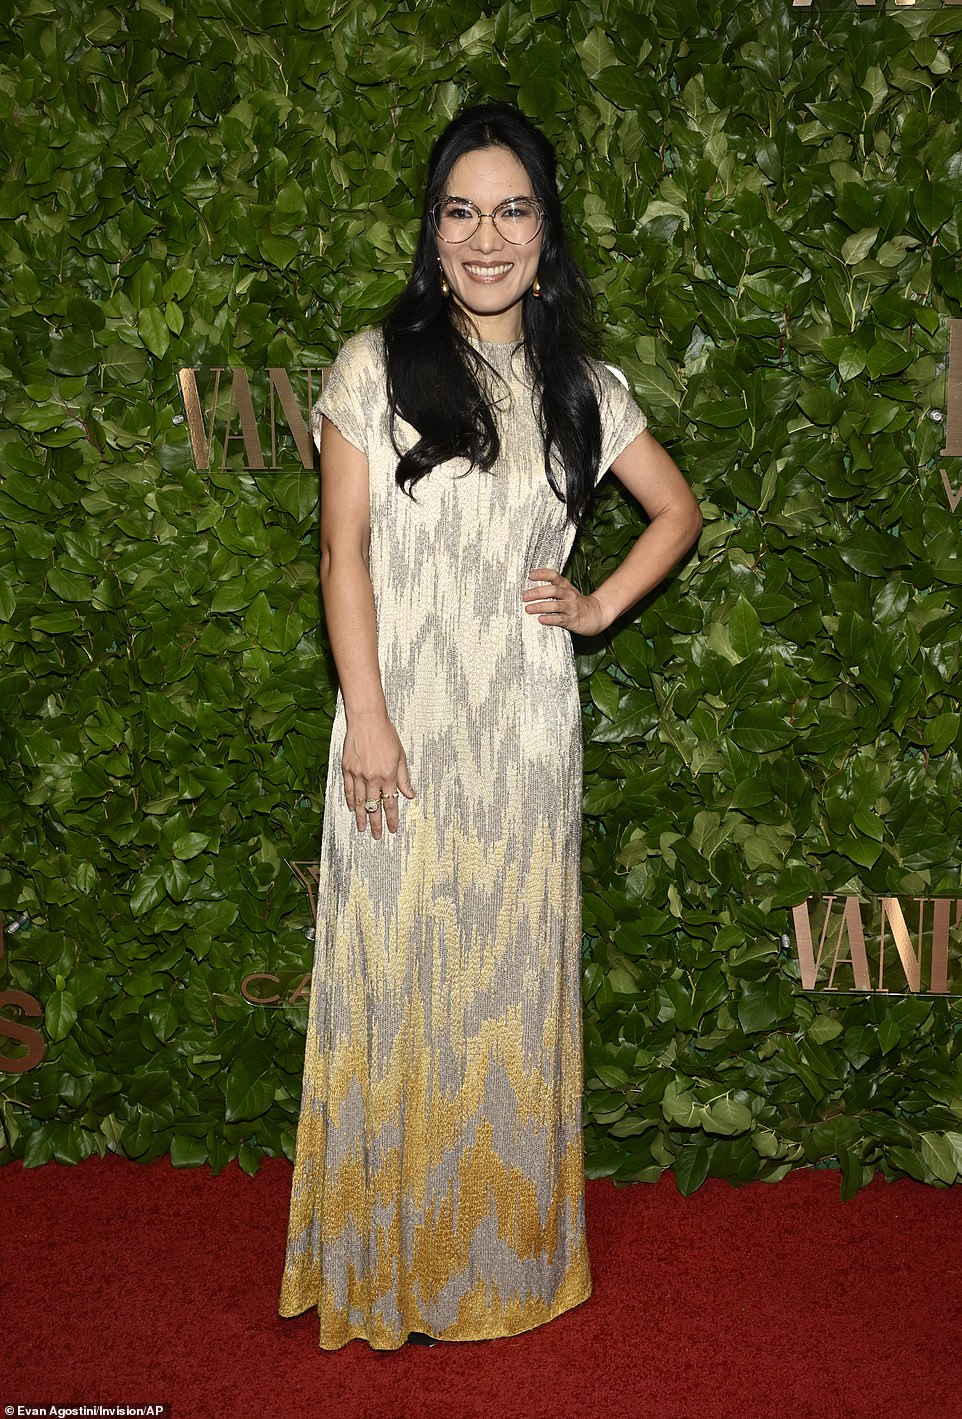 Night out: Ali Wong, who won Outstanding Performance in a New Series for her Beef, wowed in a ombré dress with a chevron pattern